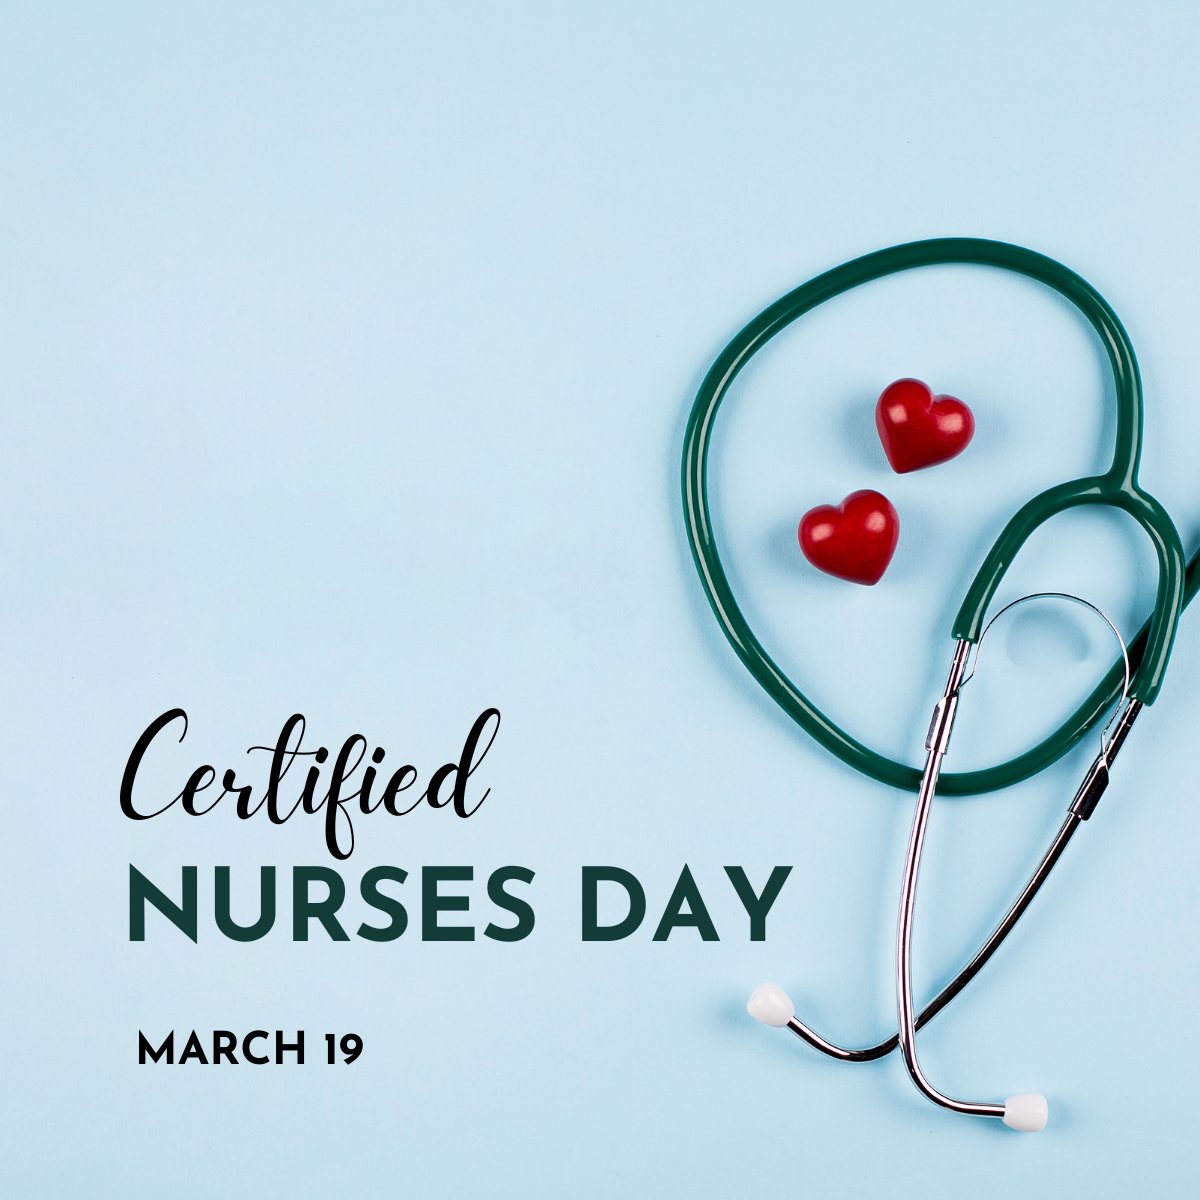 We're celebrating #NationalCertifiedNursesDay today! Thank you to all of the incredible nurses who work tirelessly for their patients. 

#prestigestaffing #nursesday #thankyounurses #certifiednursesday